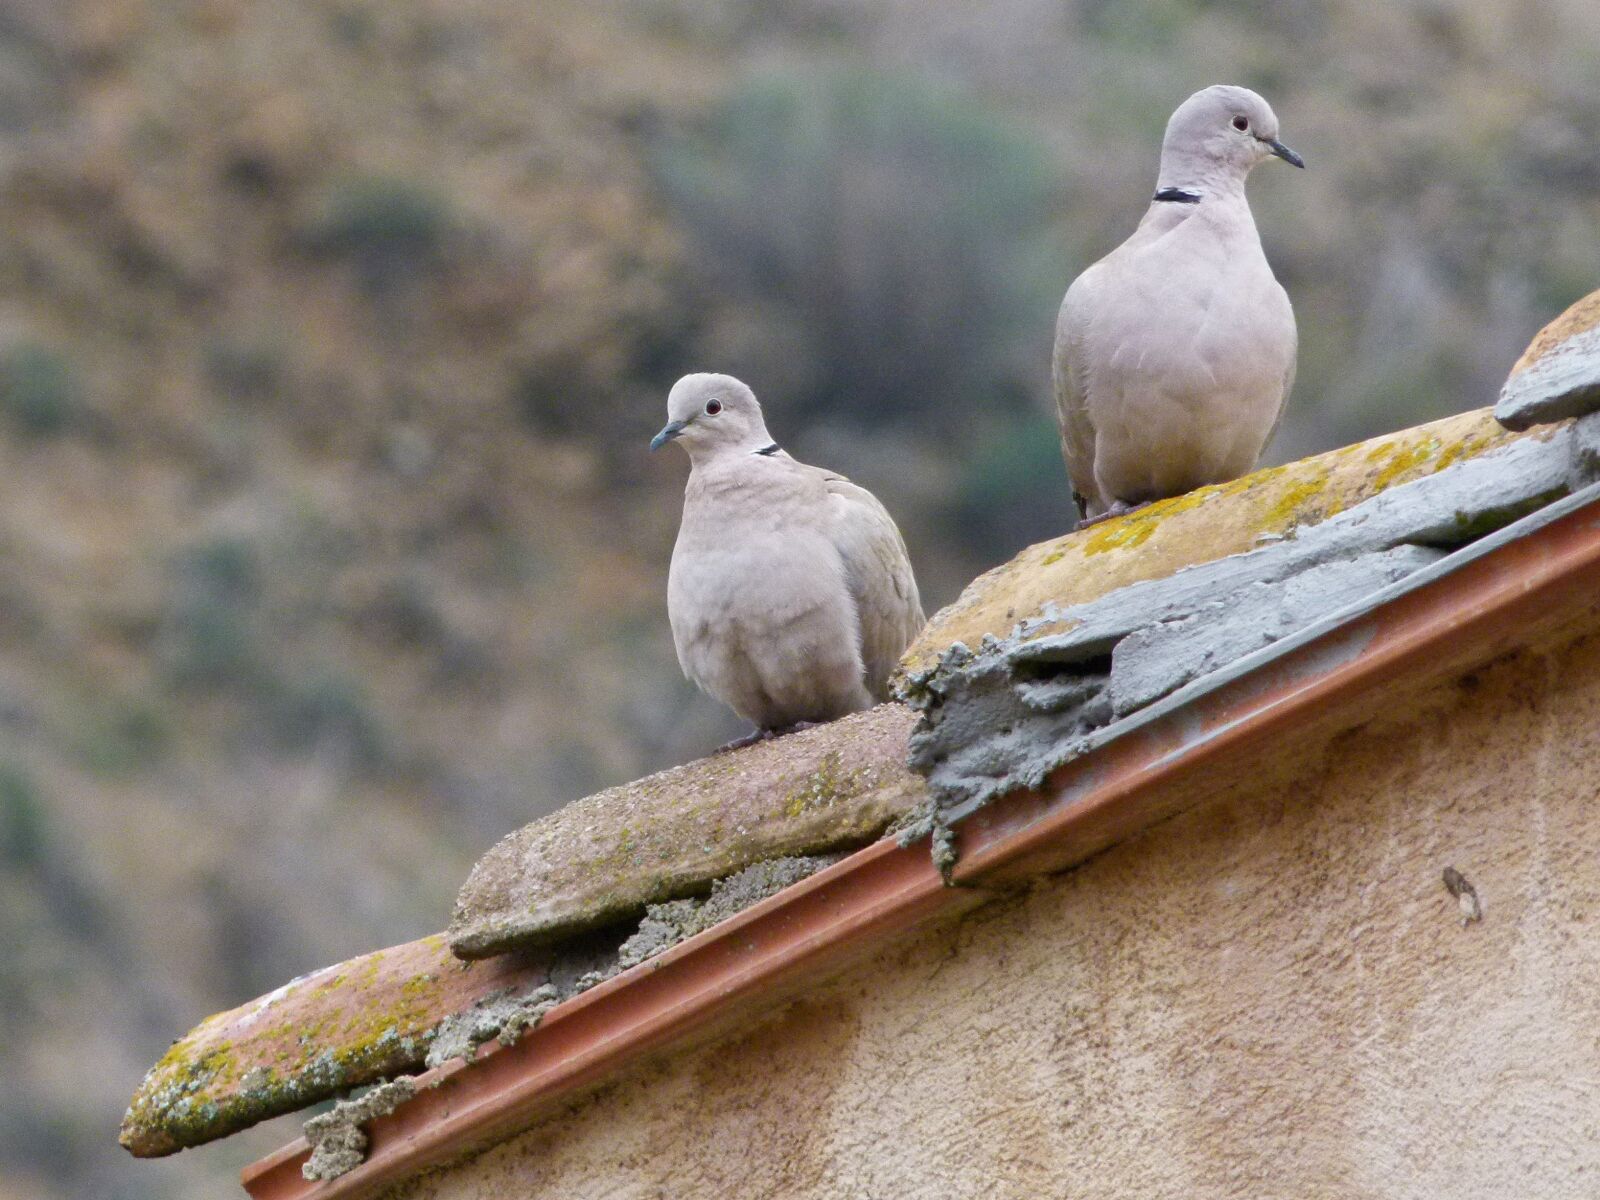 Leica V-Lux 2 sample photo. Turtledove, turtledoves, roof photography